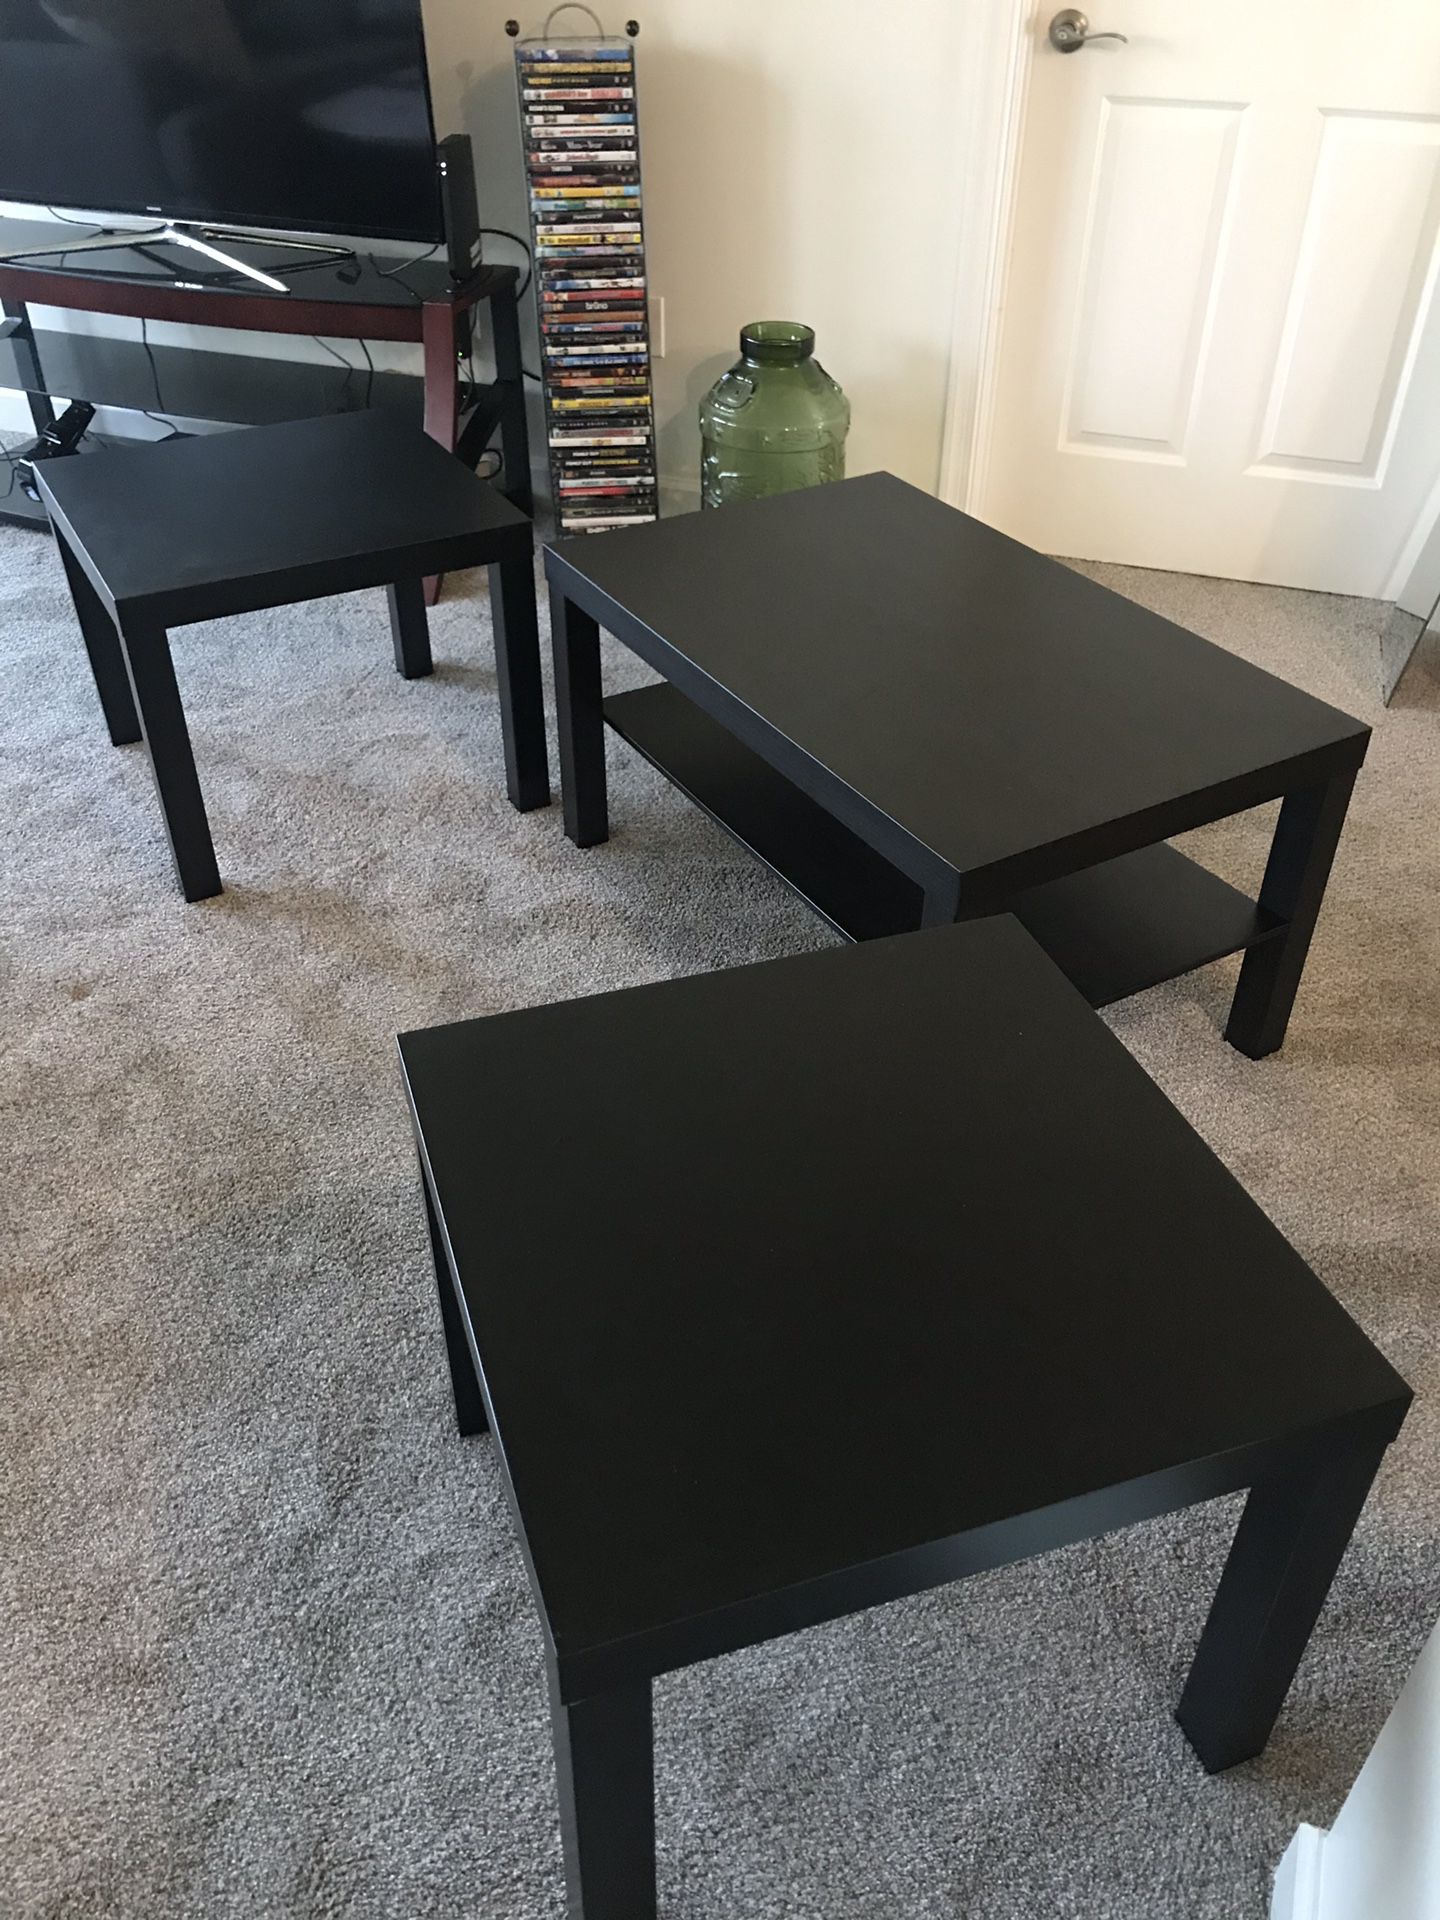 Coffe table and End Tables - Black